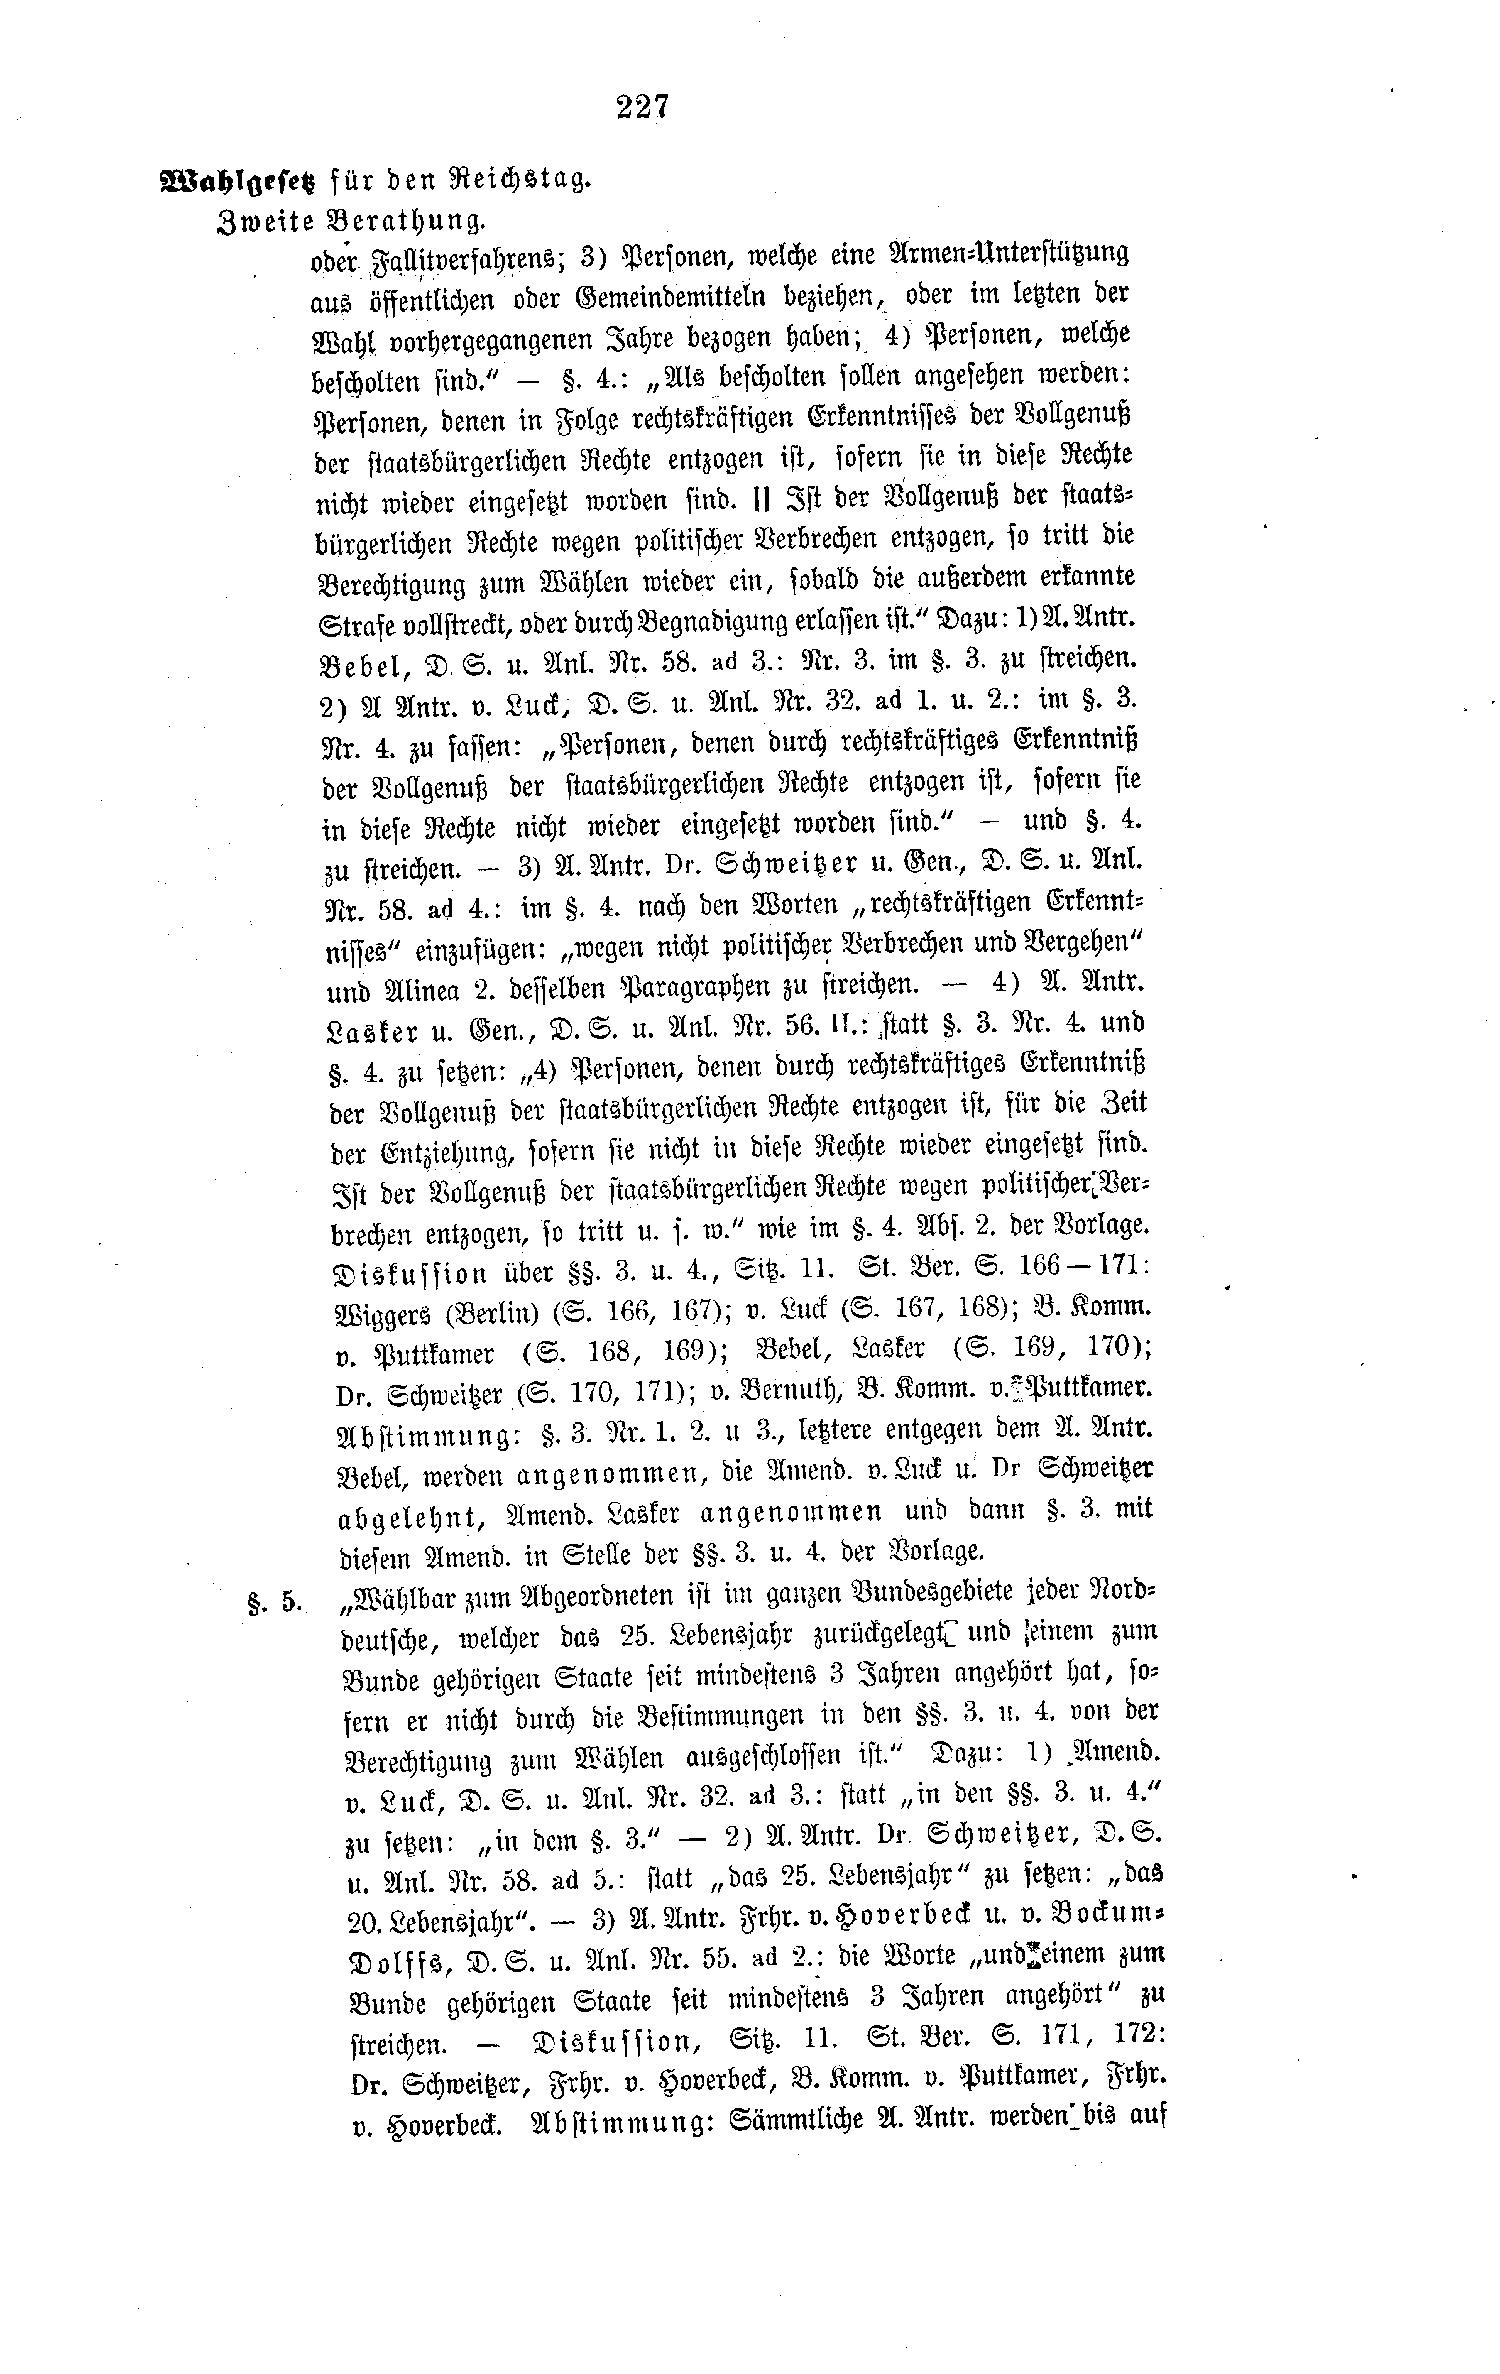 Scan of page 227